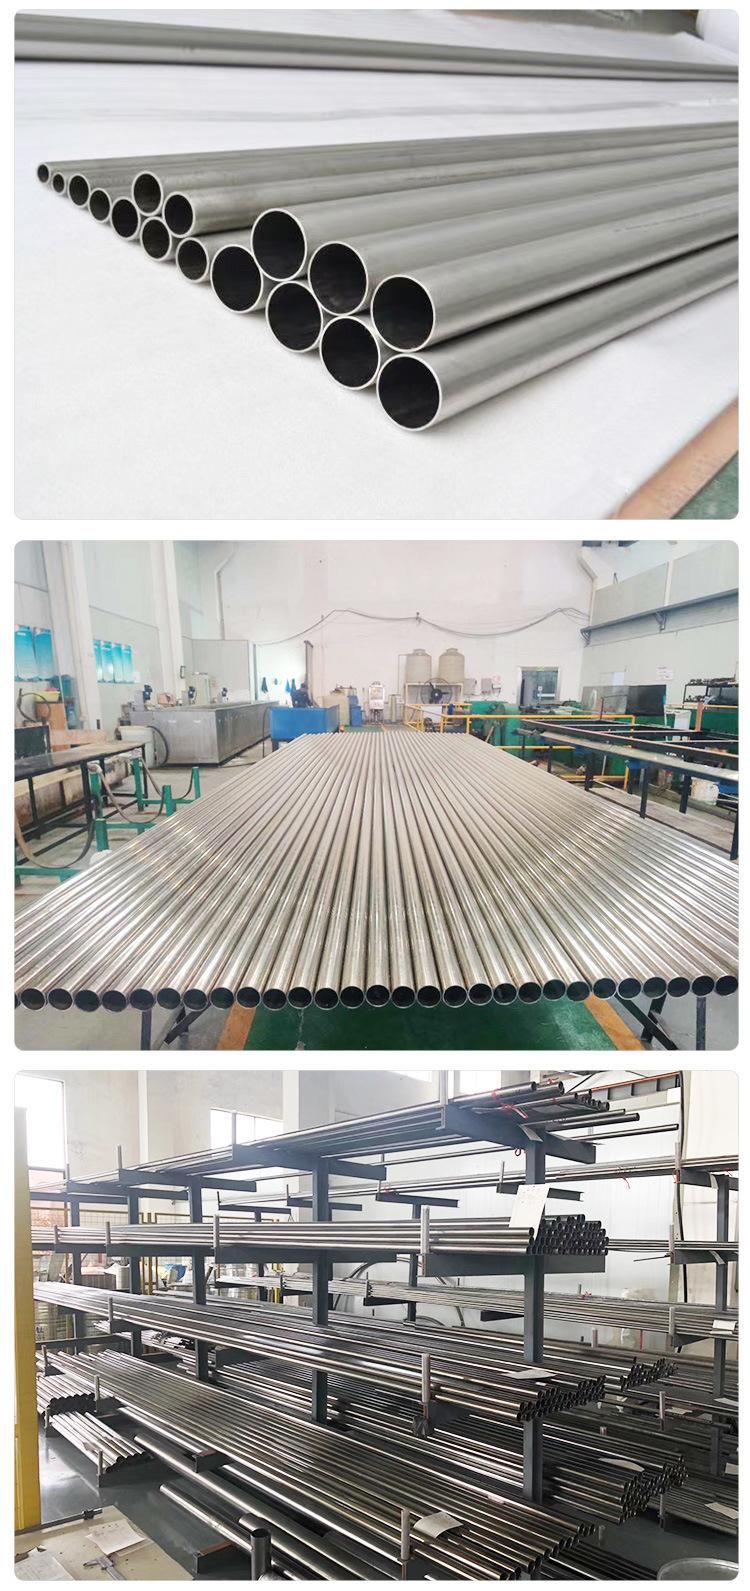 Stainless Steel Pipes/Tubes Hot Sale AISI 304 316 310 321 304 Seamless